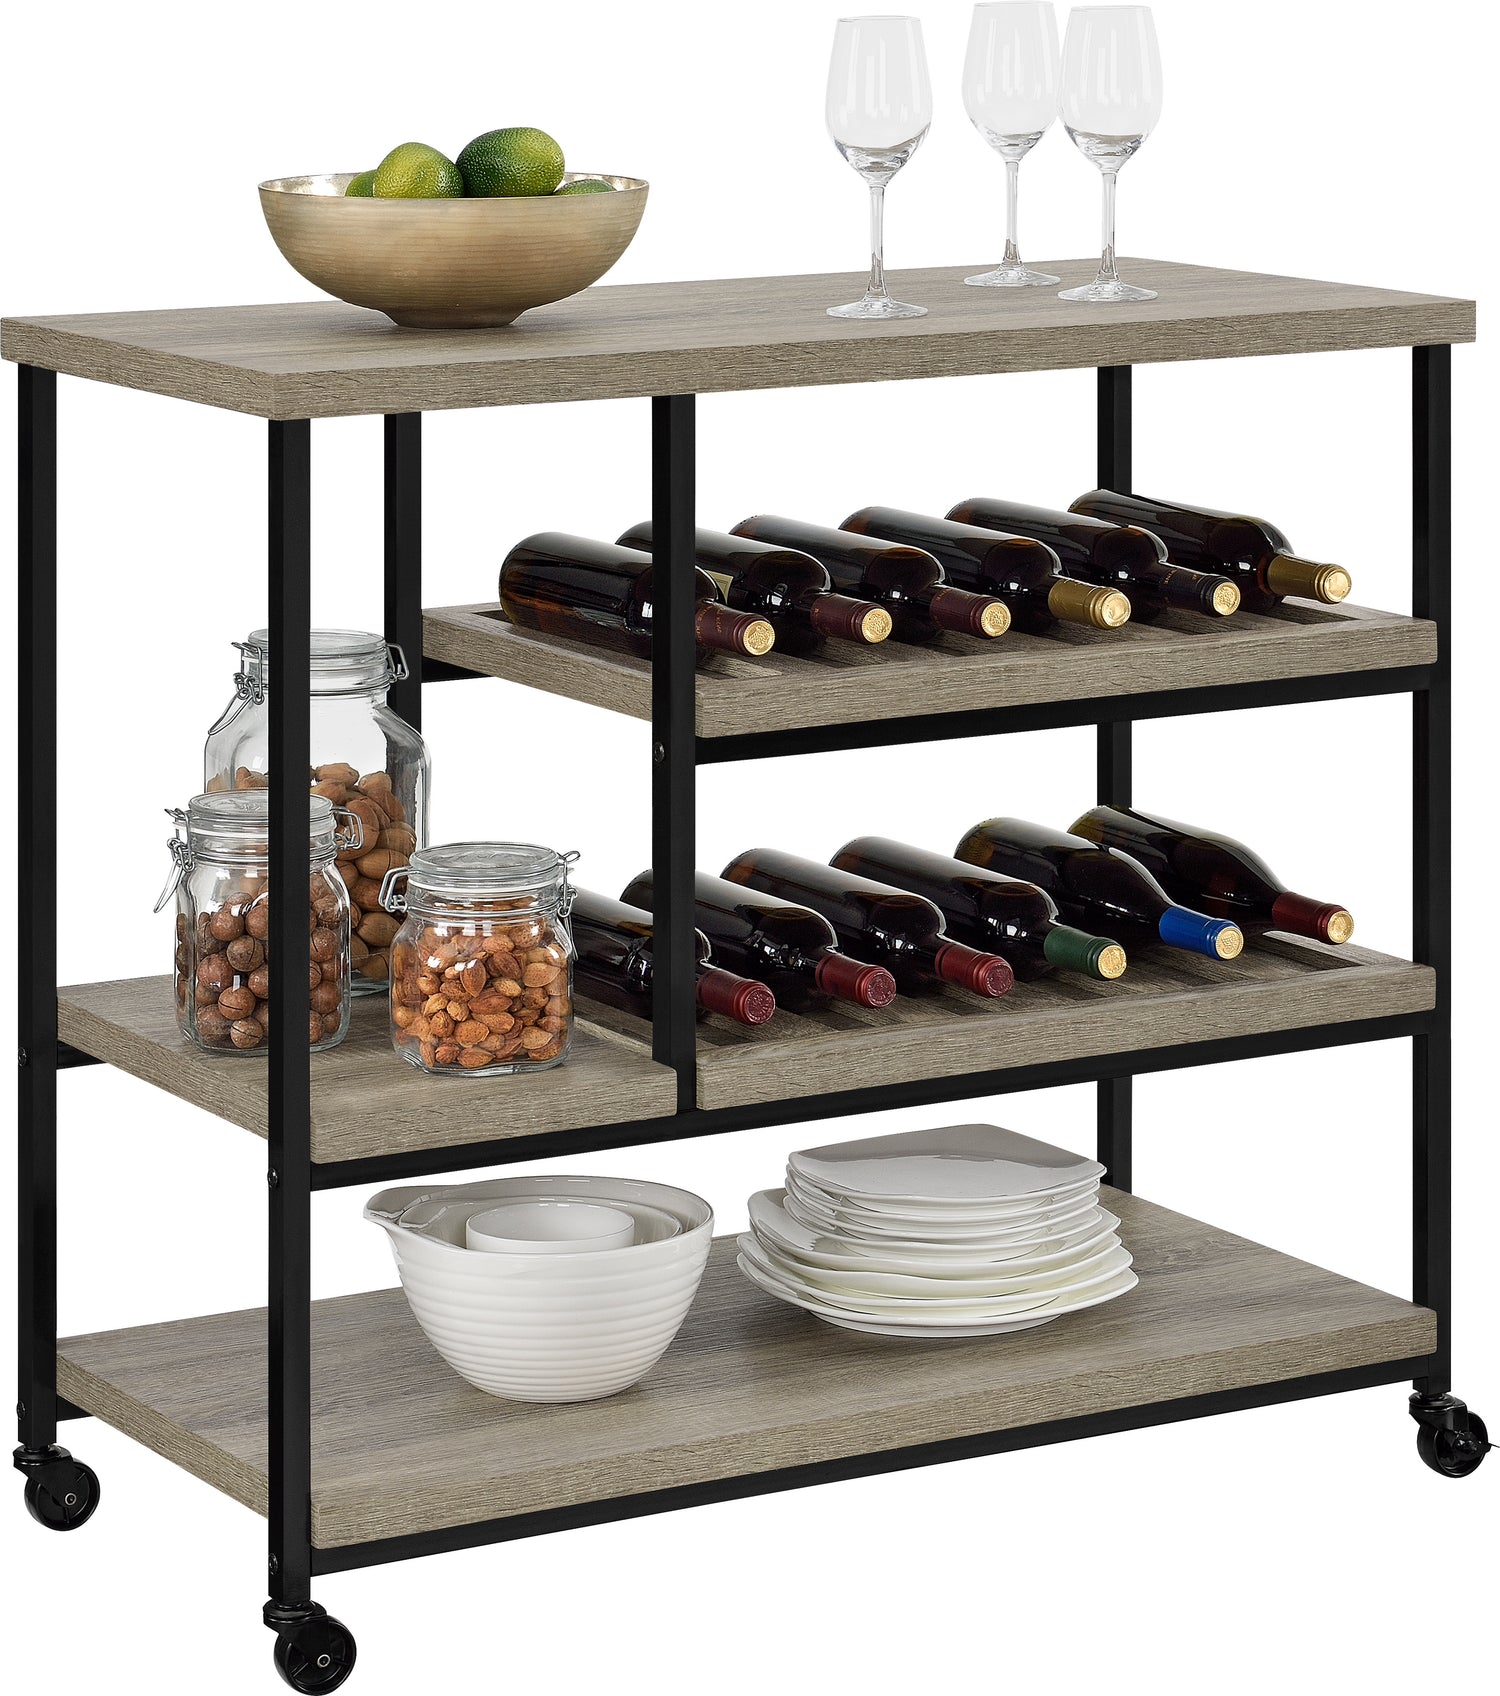 Dorel Home Elmwood Multi-Purpose Rolling Cart Stacked With Wine And Food-Better Bed Company 